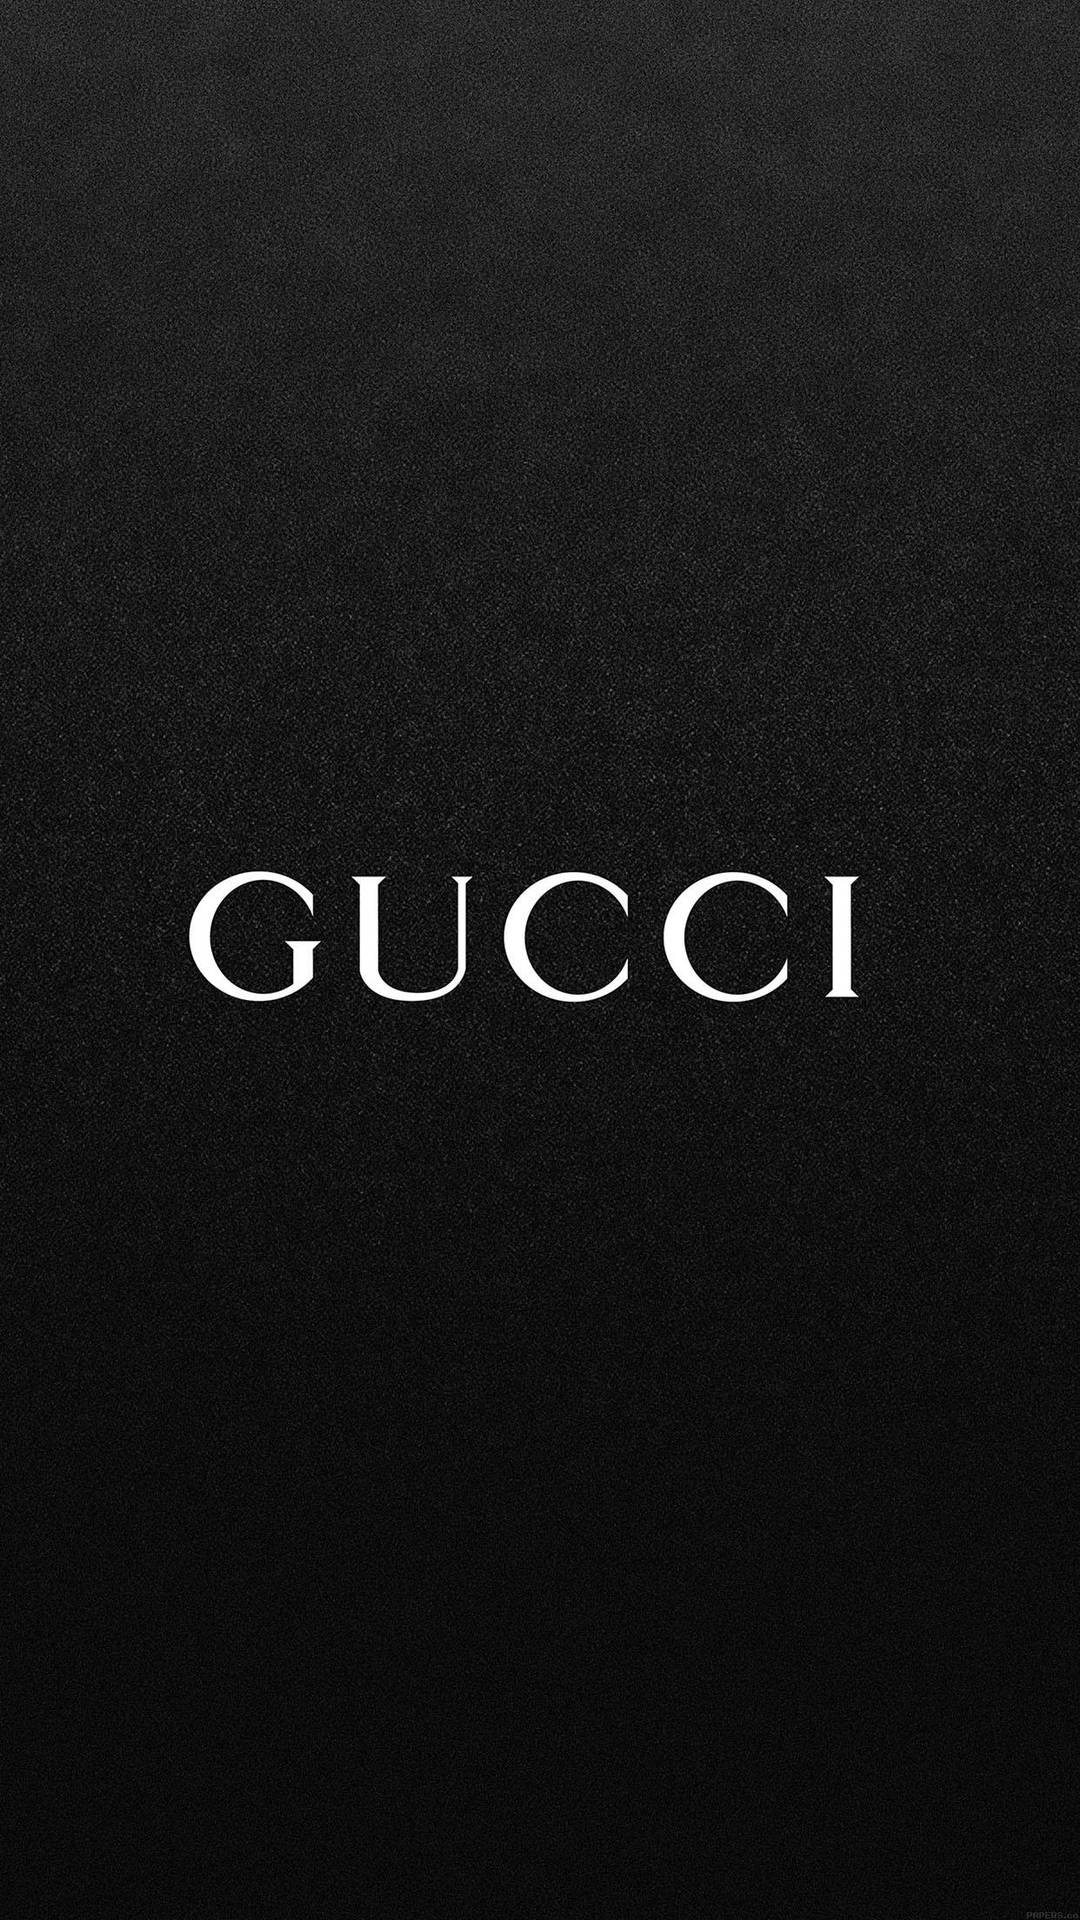 Simple Gucci Iphone Background Wallpaper